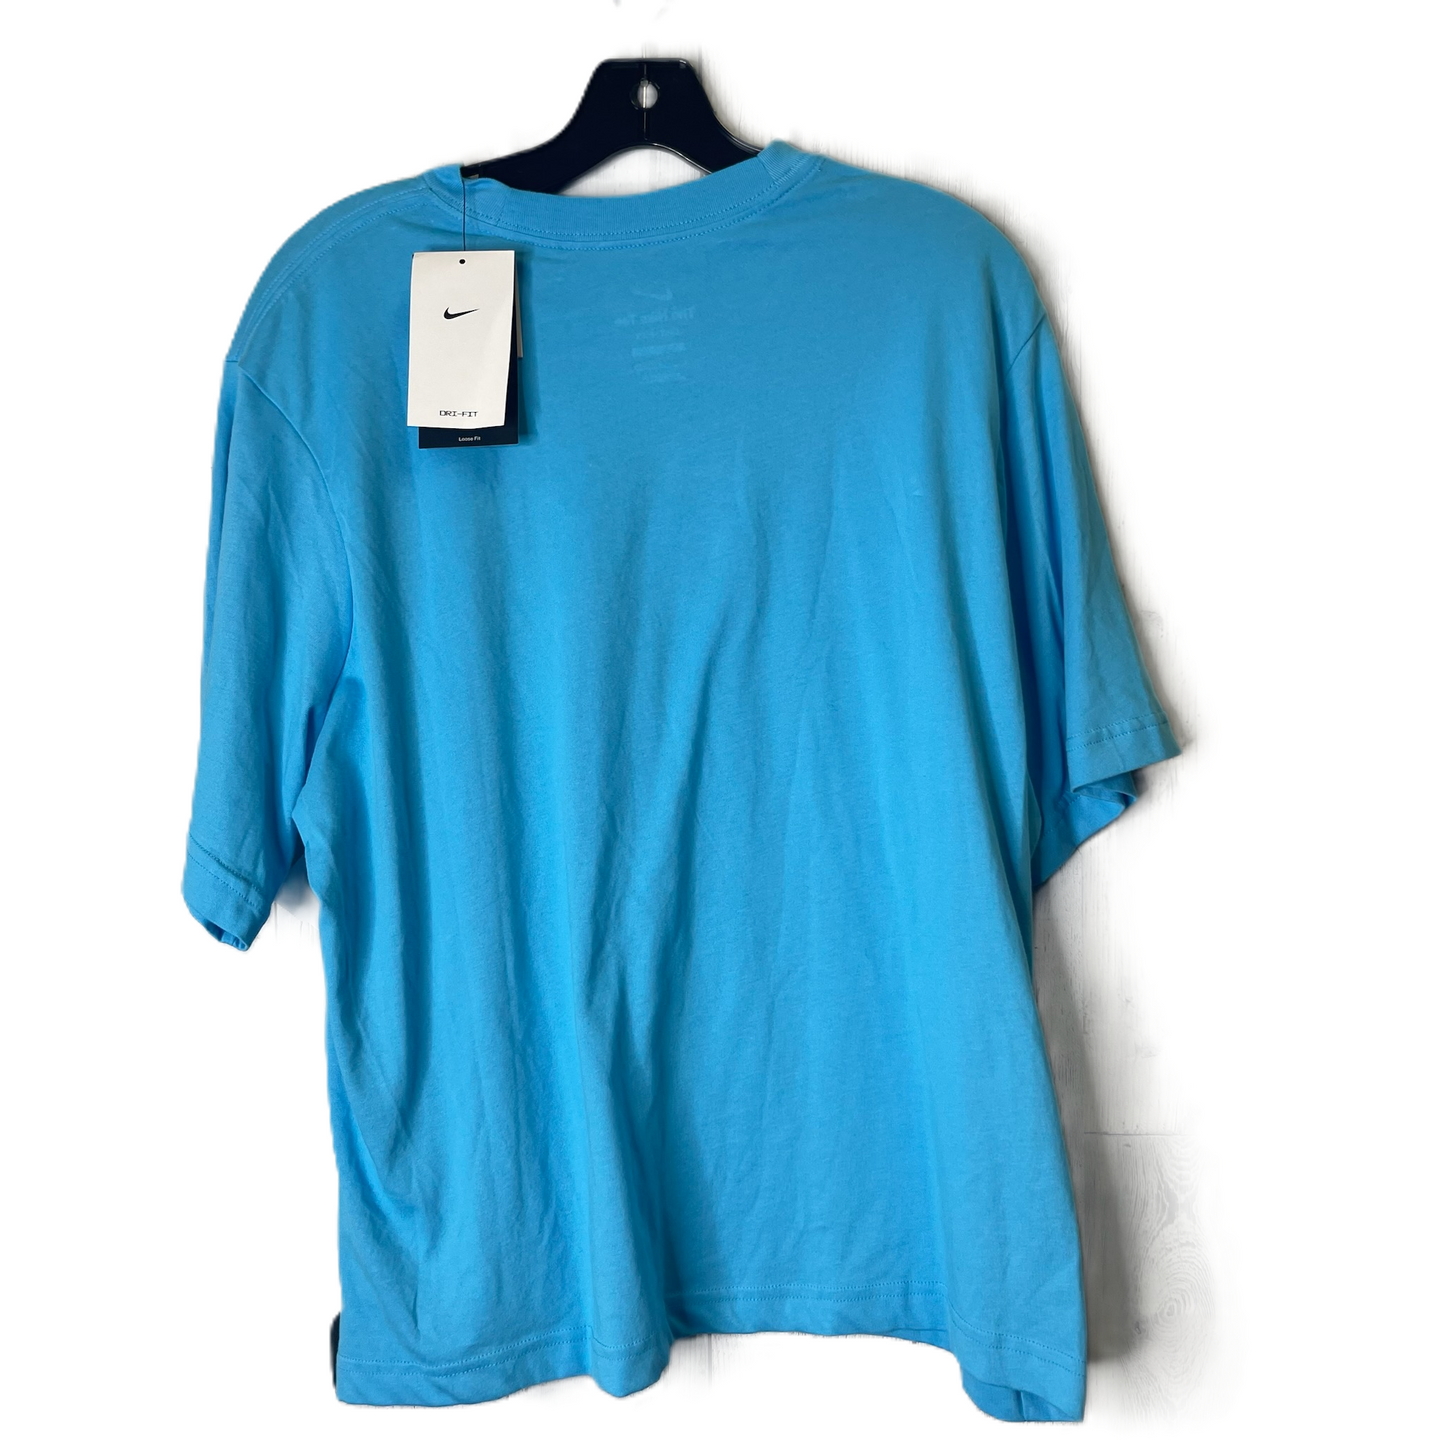 Teal Athletic Top Short Sleeve By Nike, Size: L